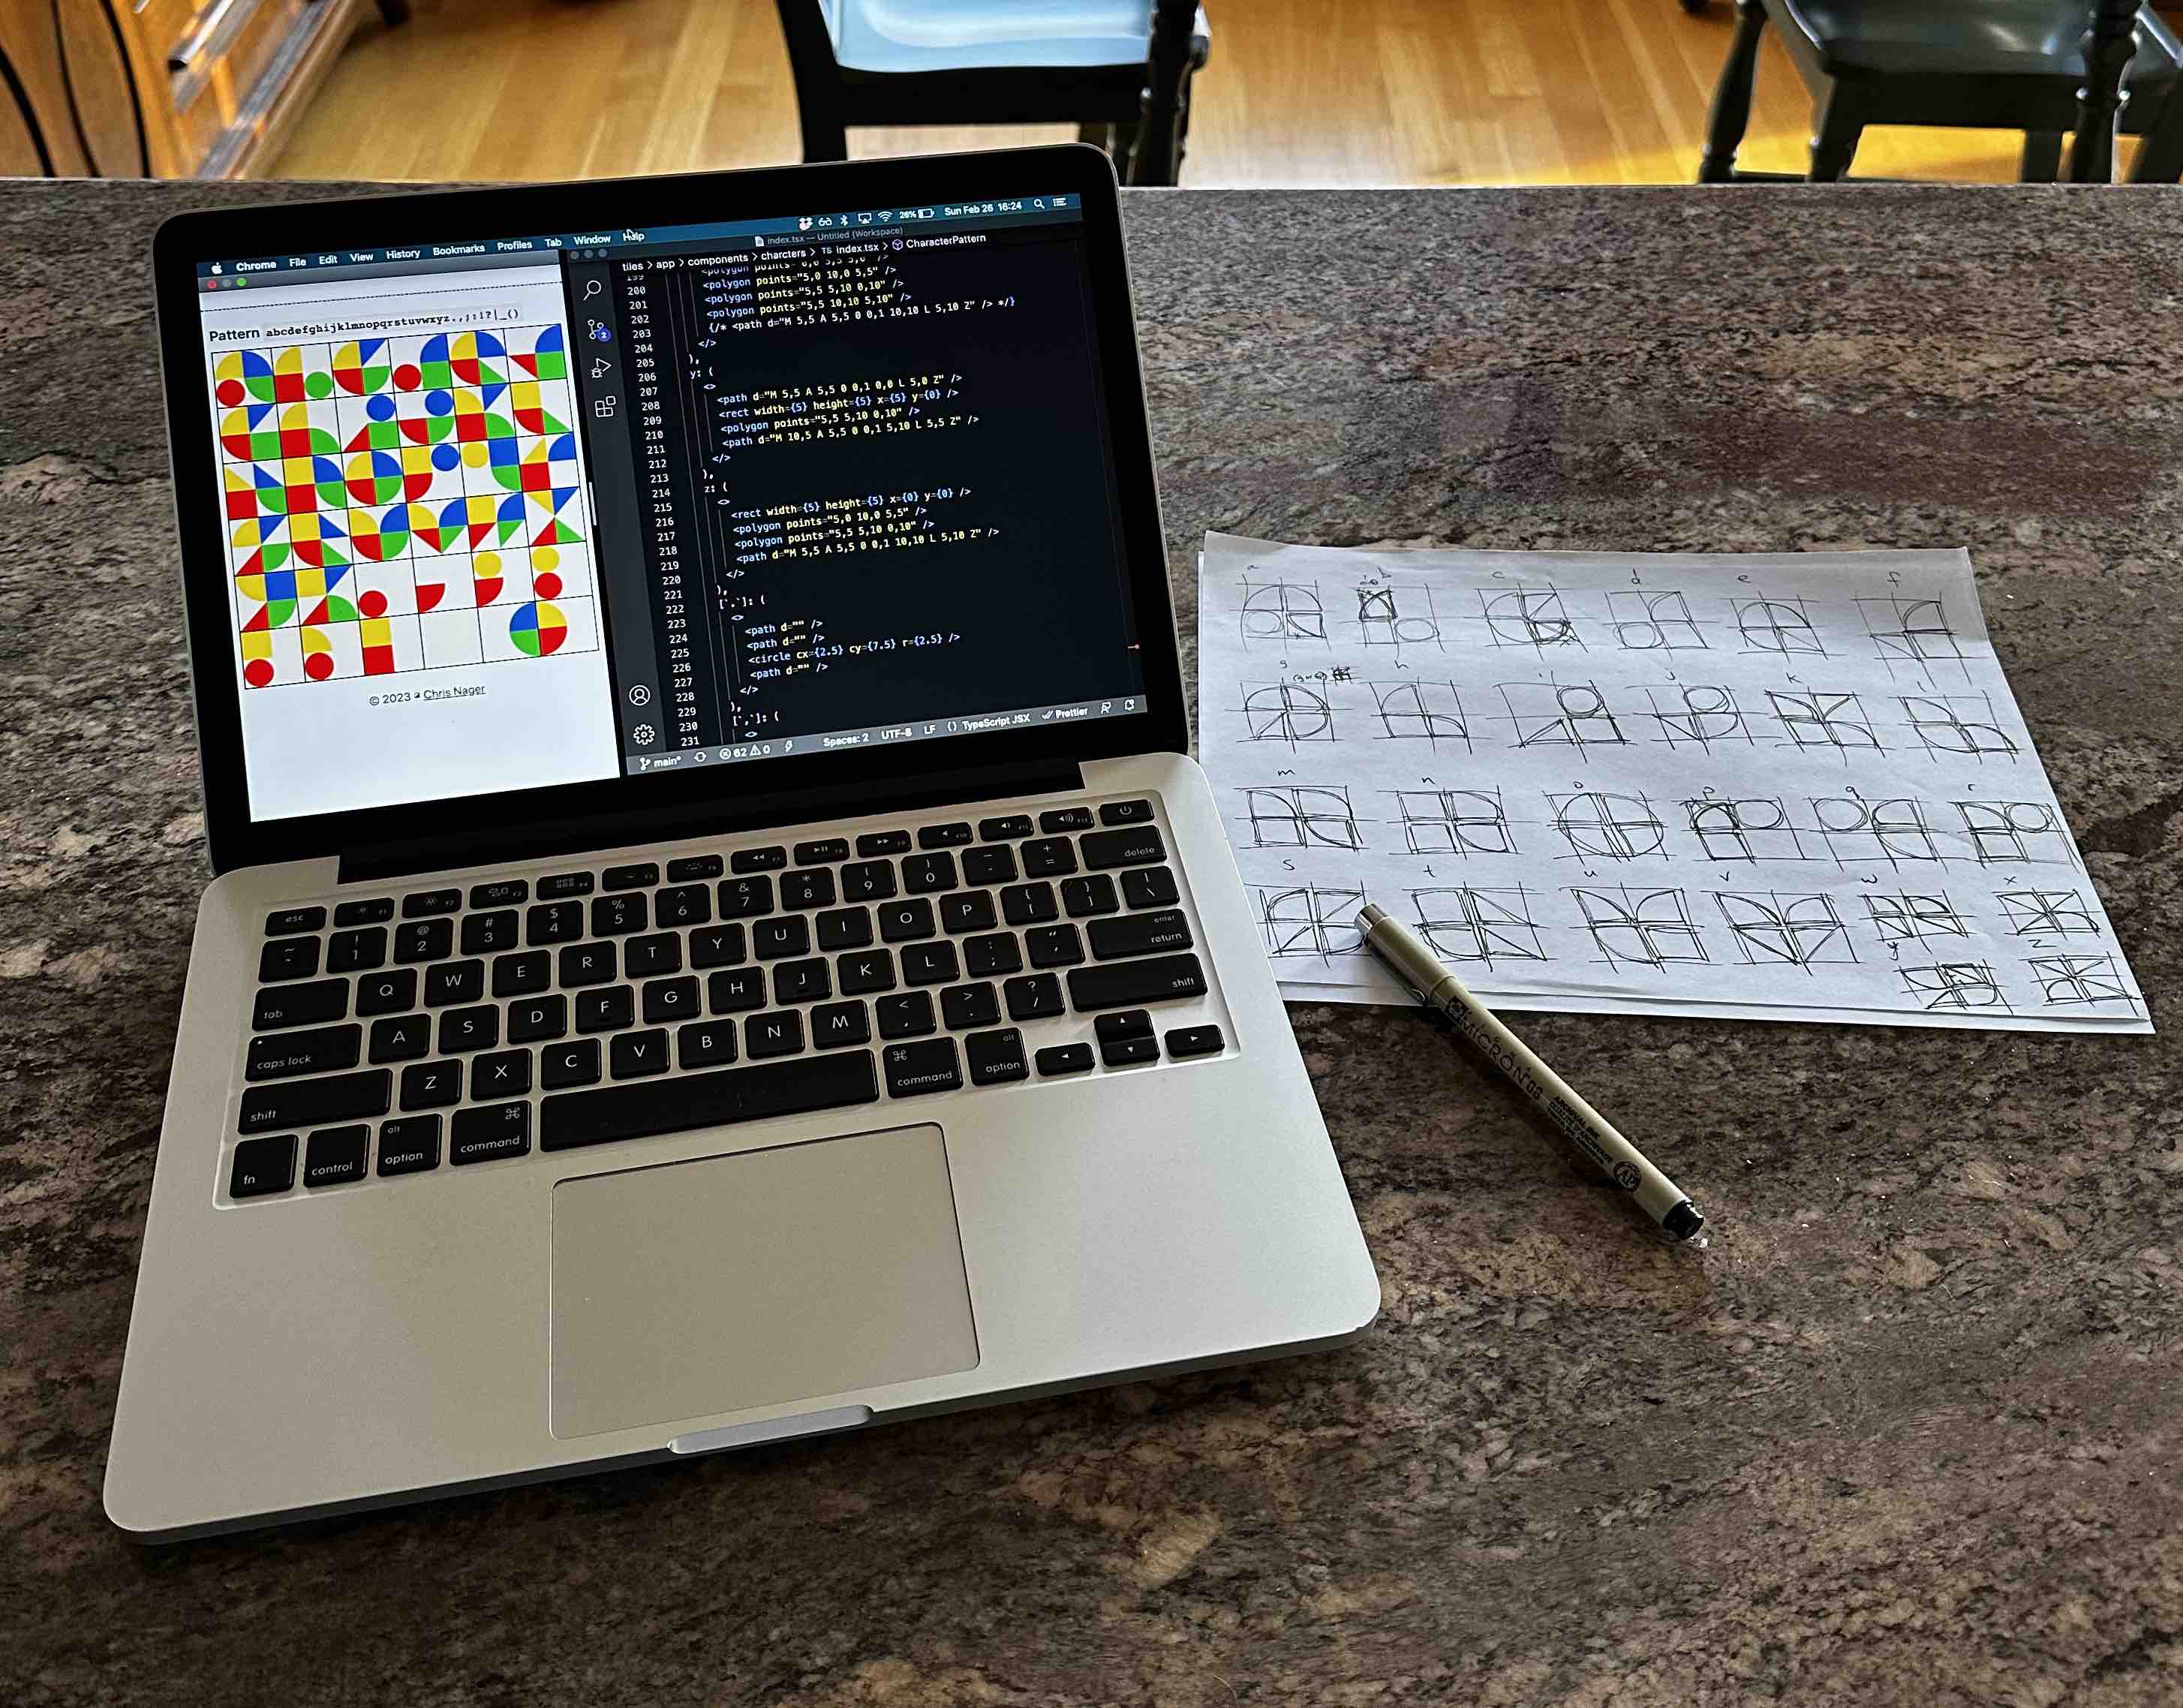 Computer displaying the in-progress Tiles site and a code editor, with a piece of paper next to it with sketches of the geometric Tiles typeface